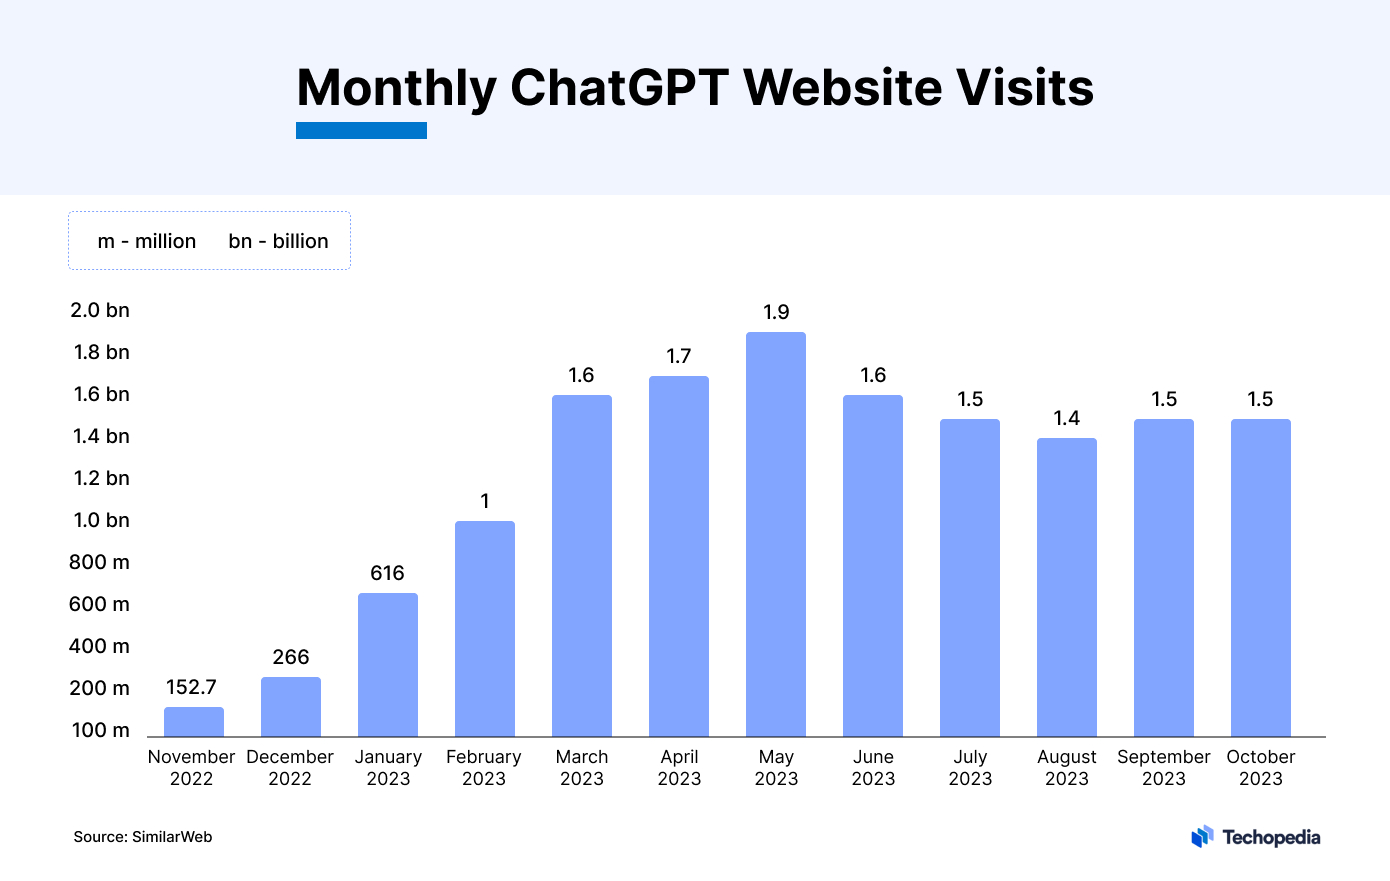 Monthly Growth of ChatGPT Visits